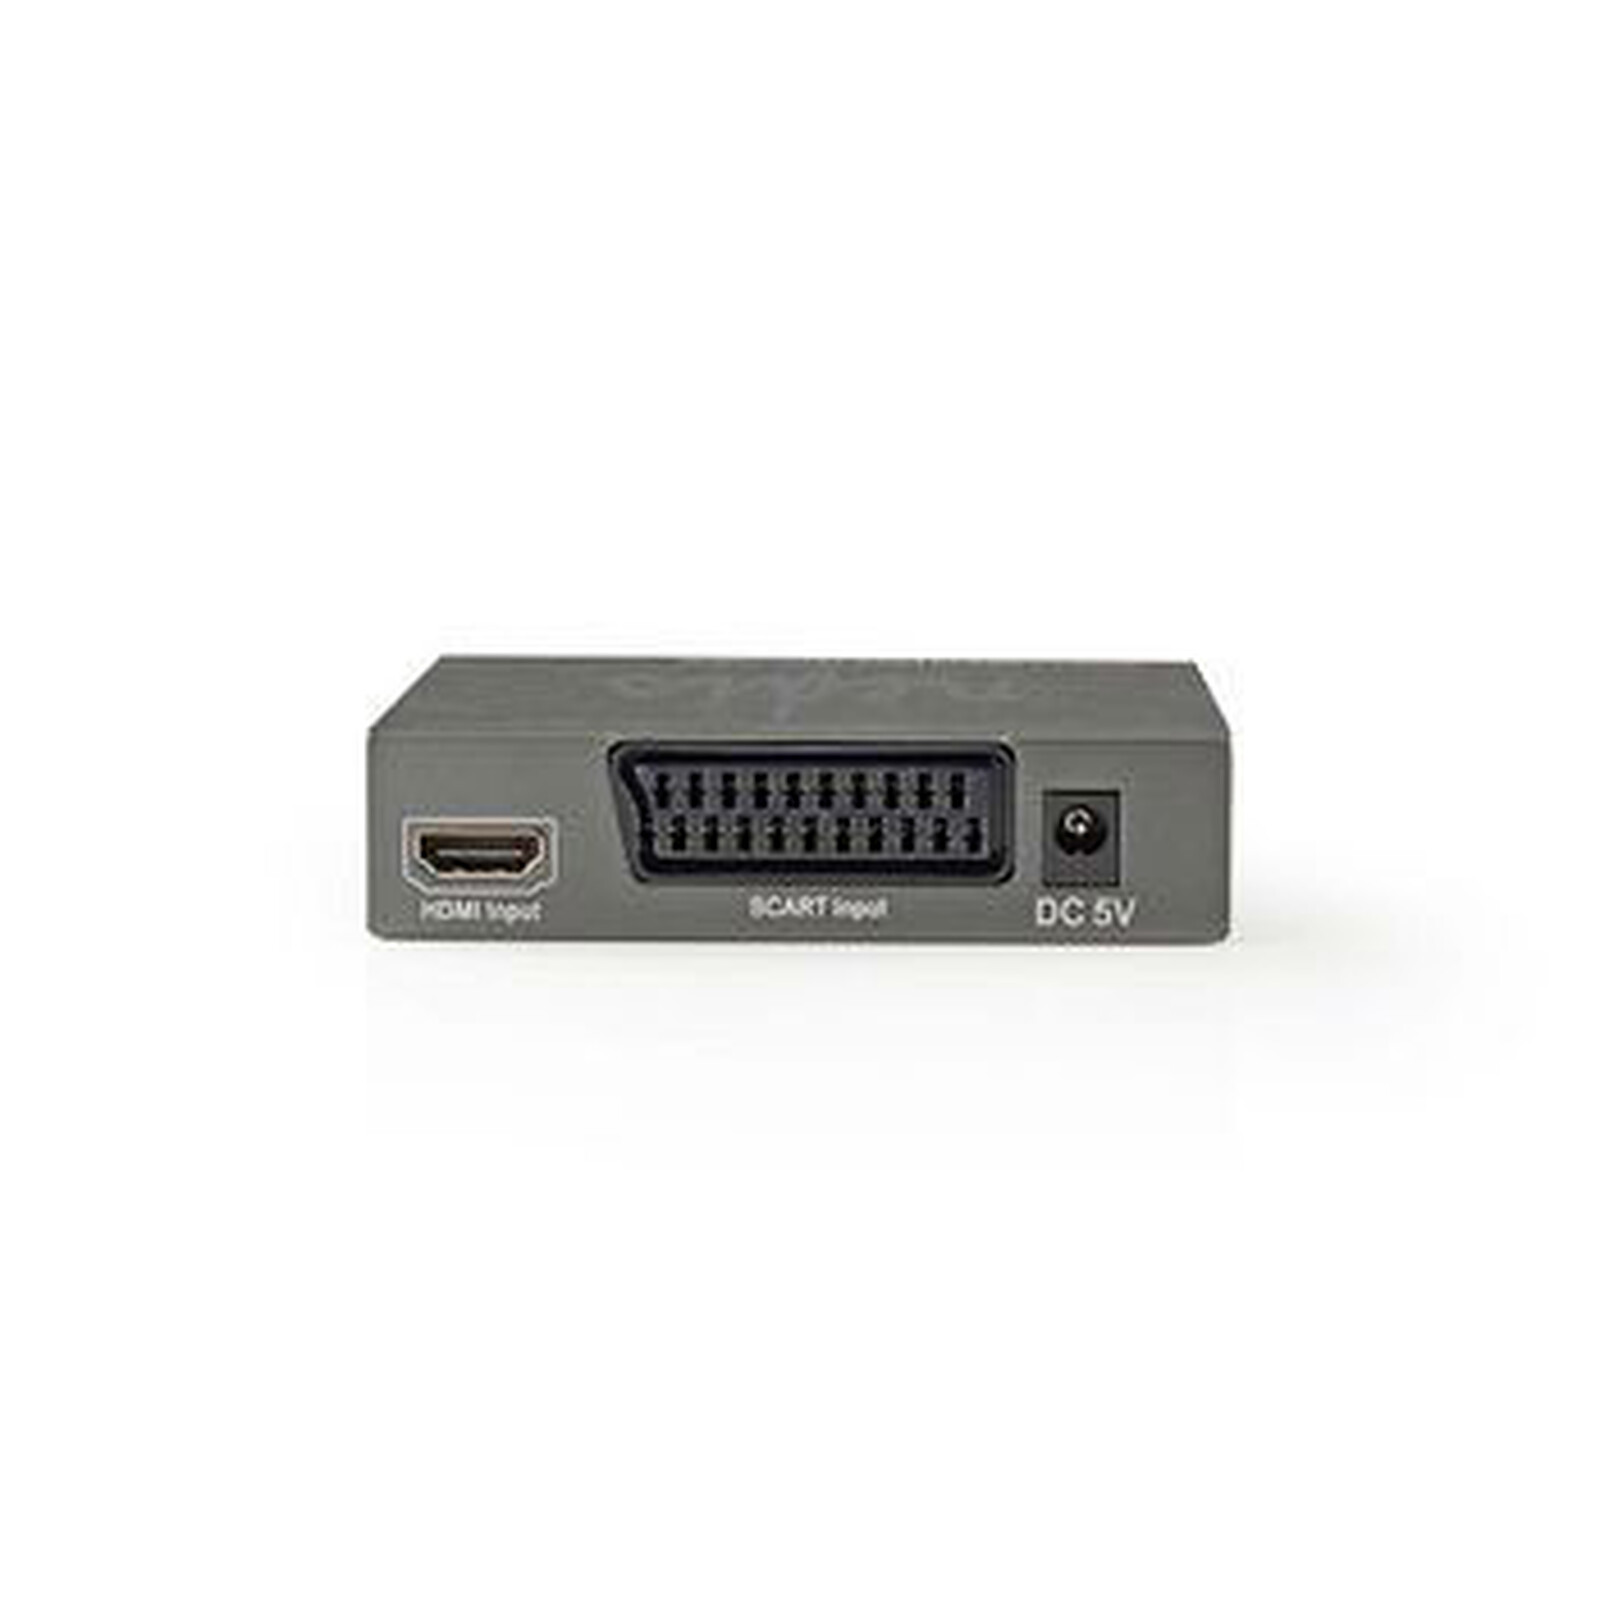 HDMI™ Converter, HDMI™ Input, SCART Female, 1-way, 1080p, 1.2 Gbps, ABS